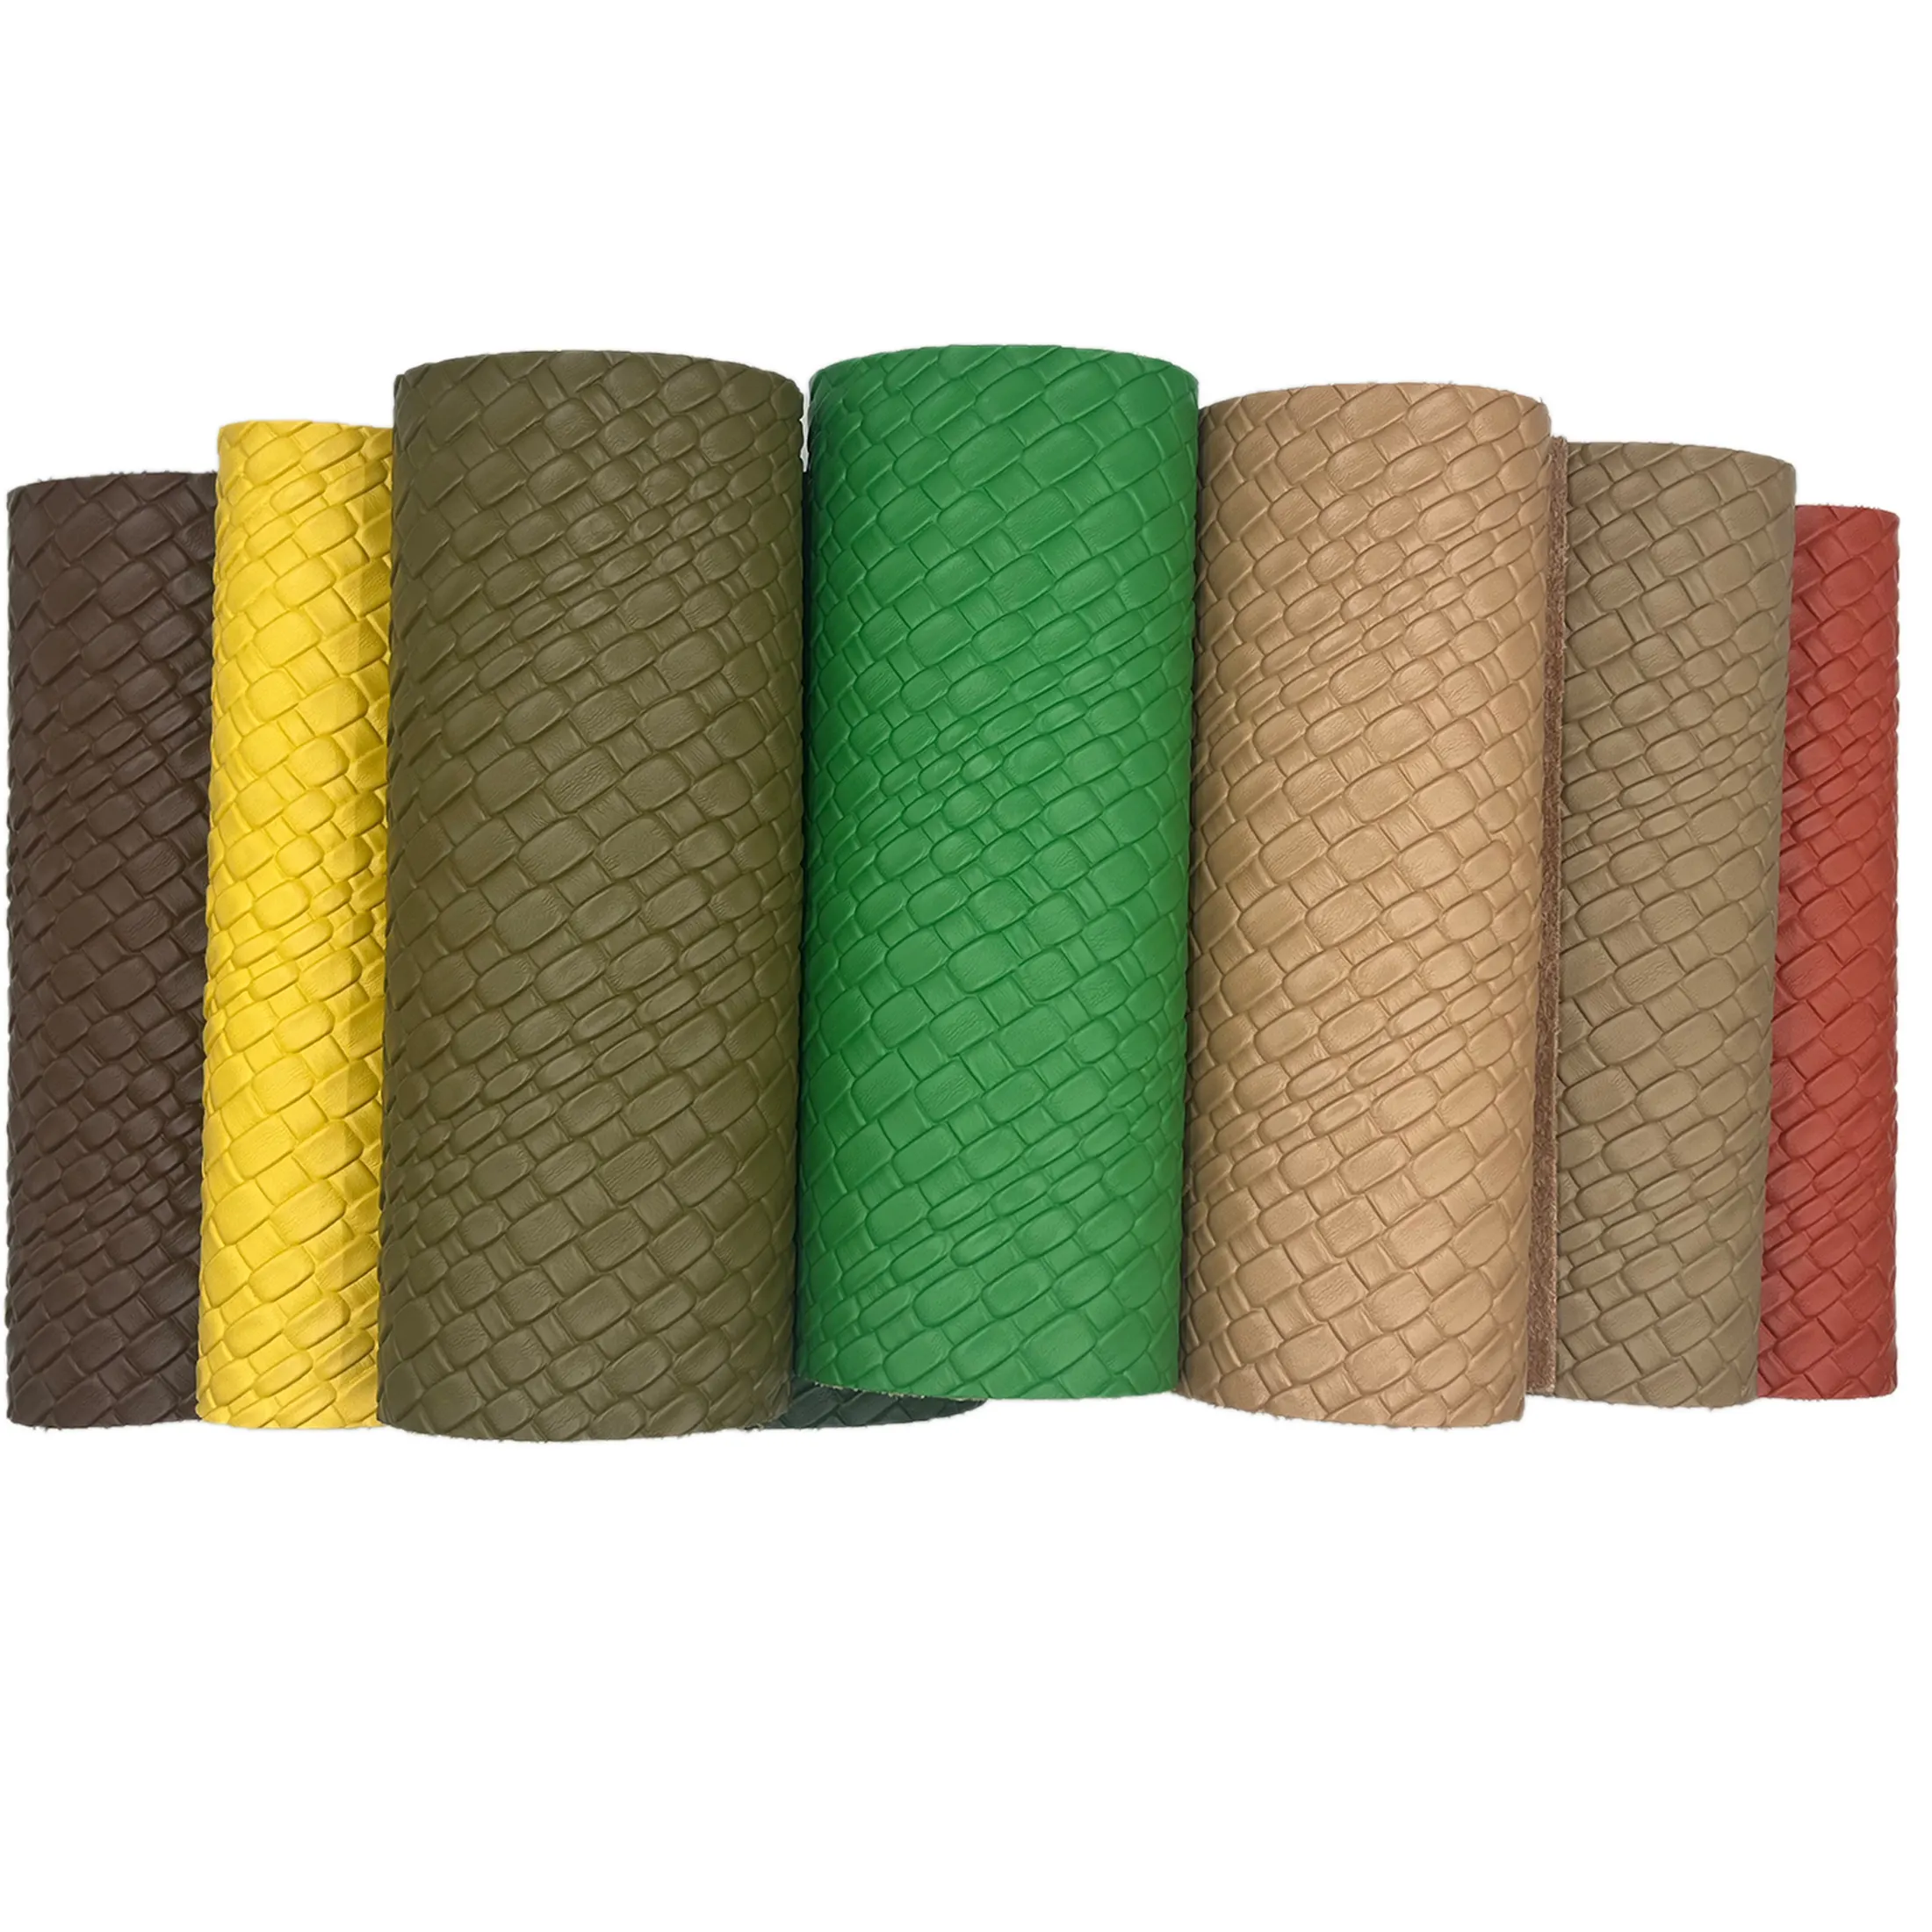 High End Series of Practical Woven PU Fabric for Car Seat Leather Fabric for Sofa Embroidery Fabrics for Upholstery Chairs